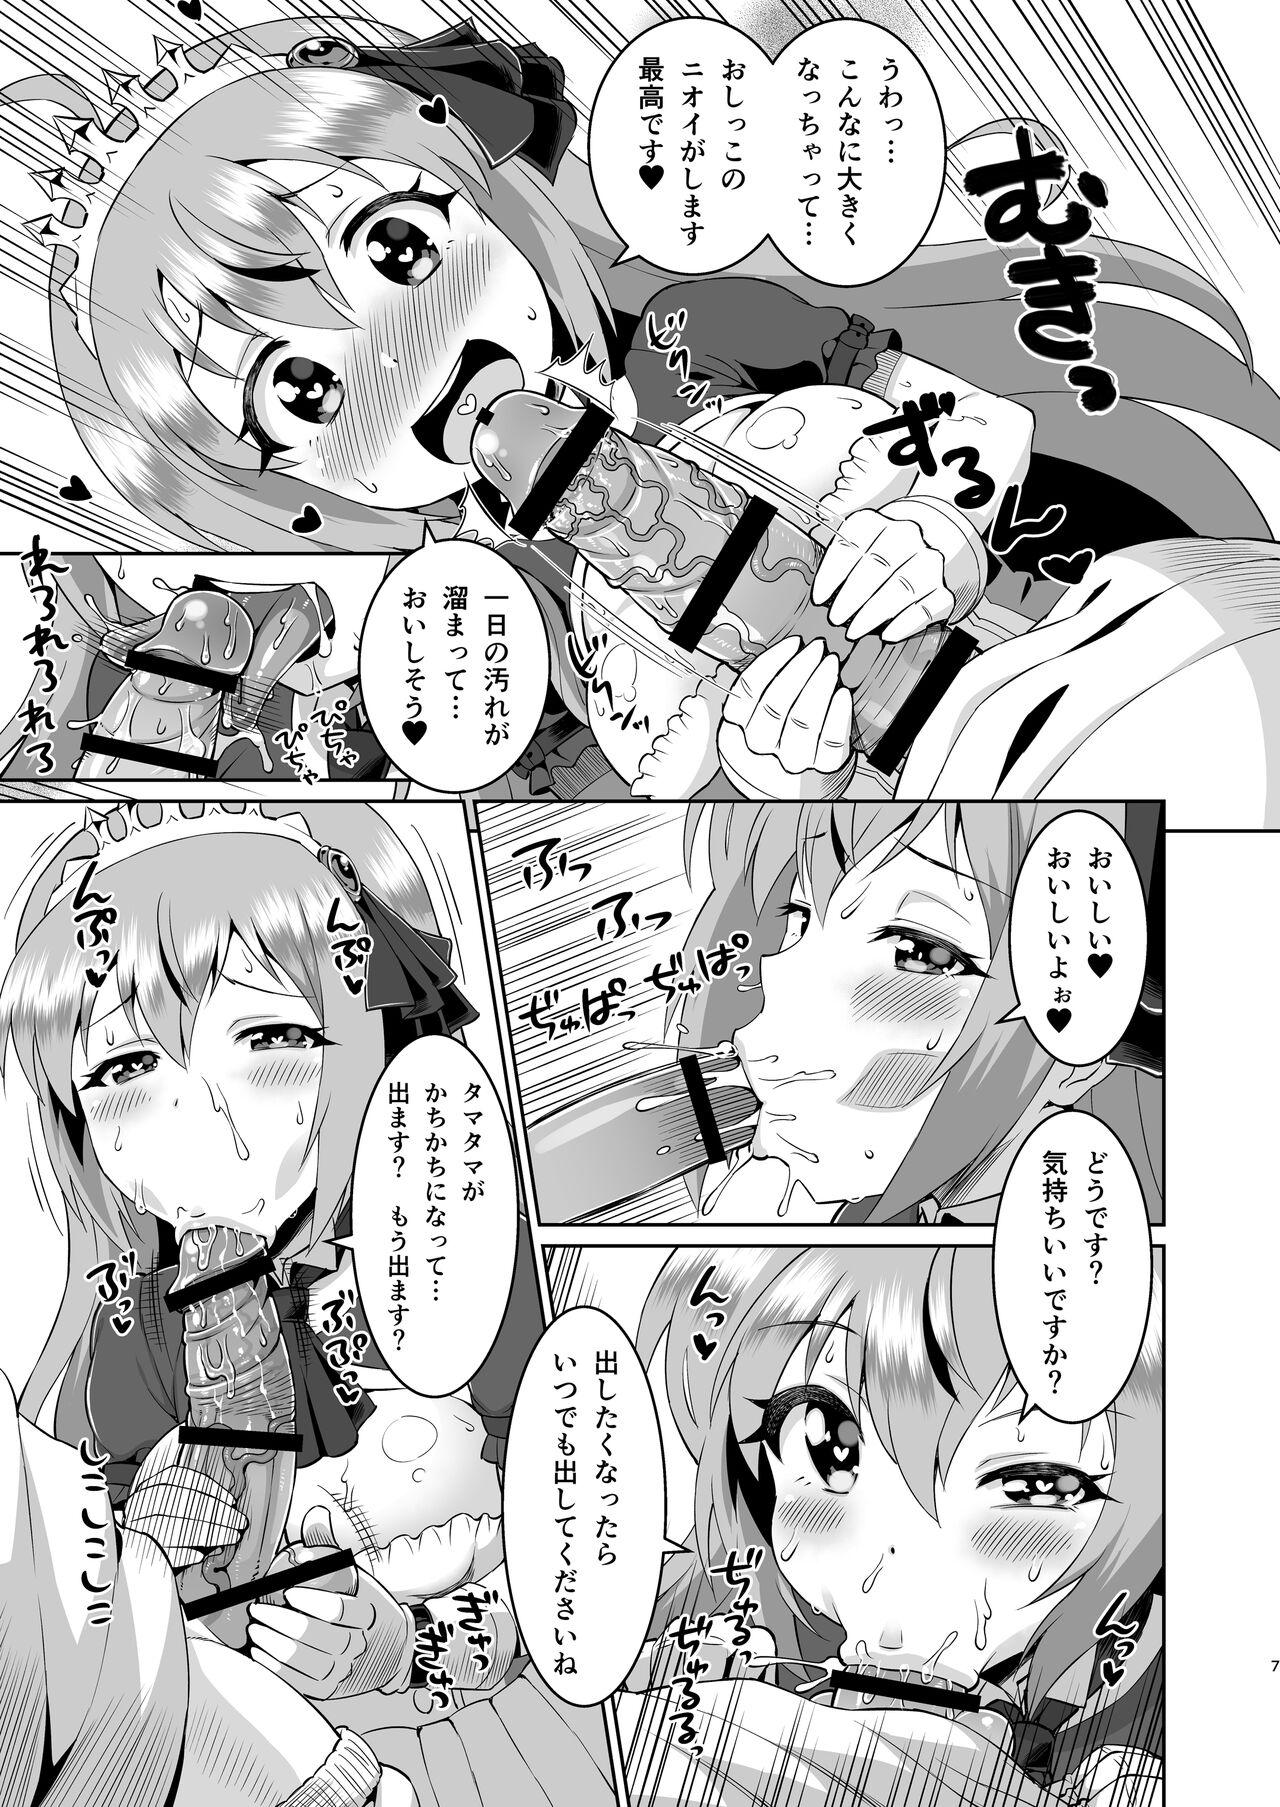 Gaping Peko-chan is so cute, isn't she? - Princess connect 3some - Page 6